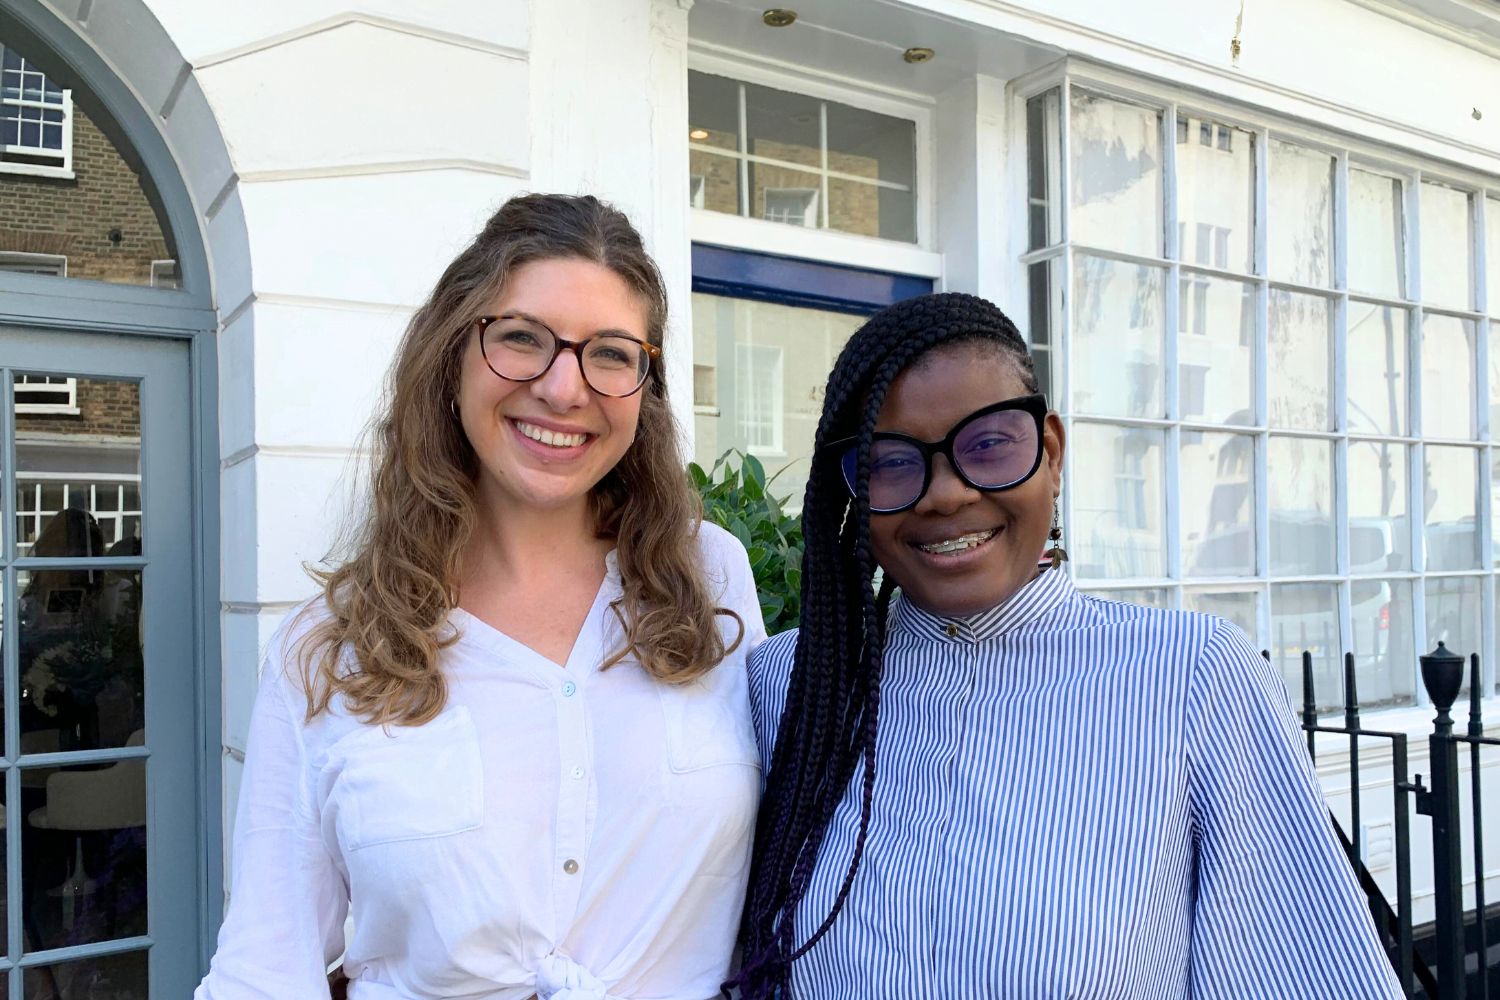 Marcia Skervin, Owner of Connect Your Dots, former mentee poses with Mentoring Programme Manager, Angela Da Silva, outside the Cherie Blair Foundation for Women's offices during a visit to London.